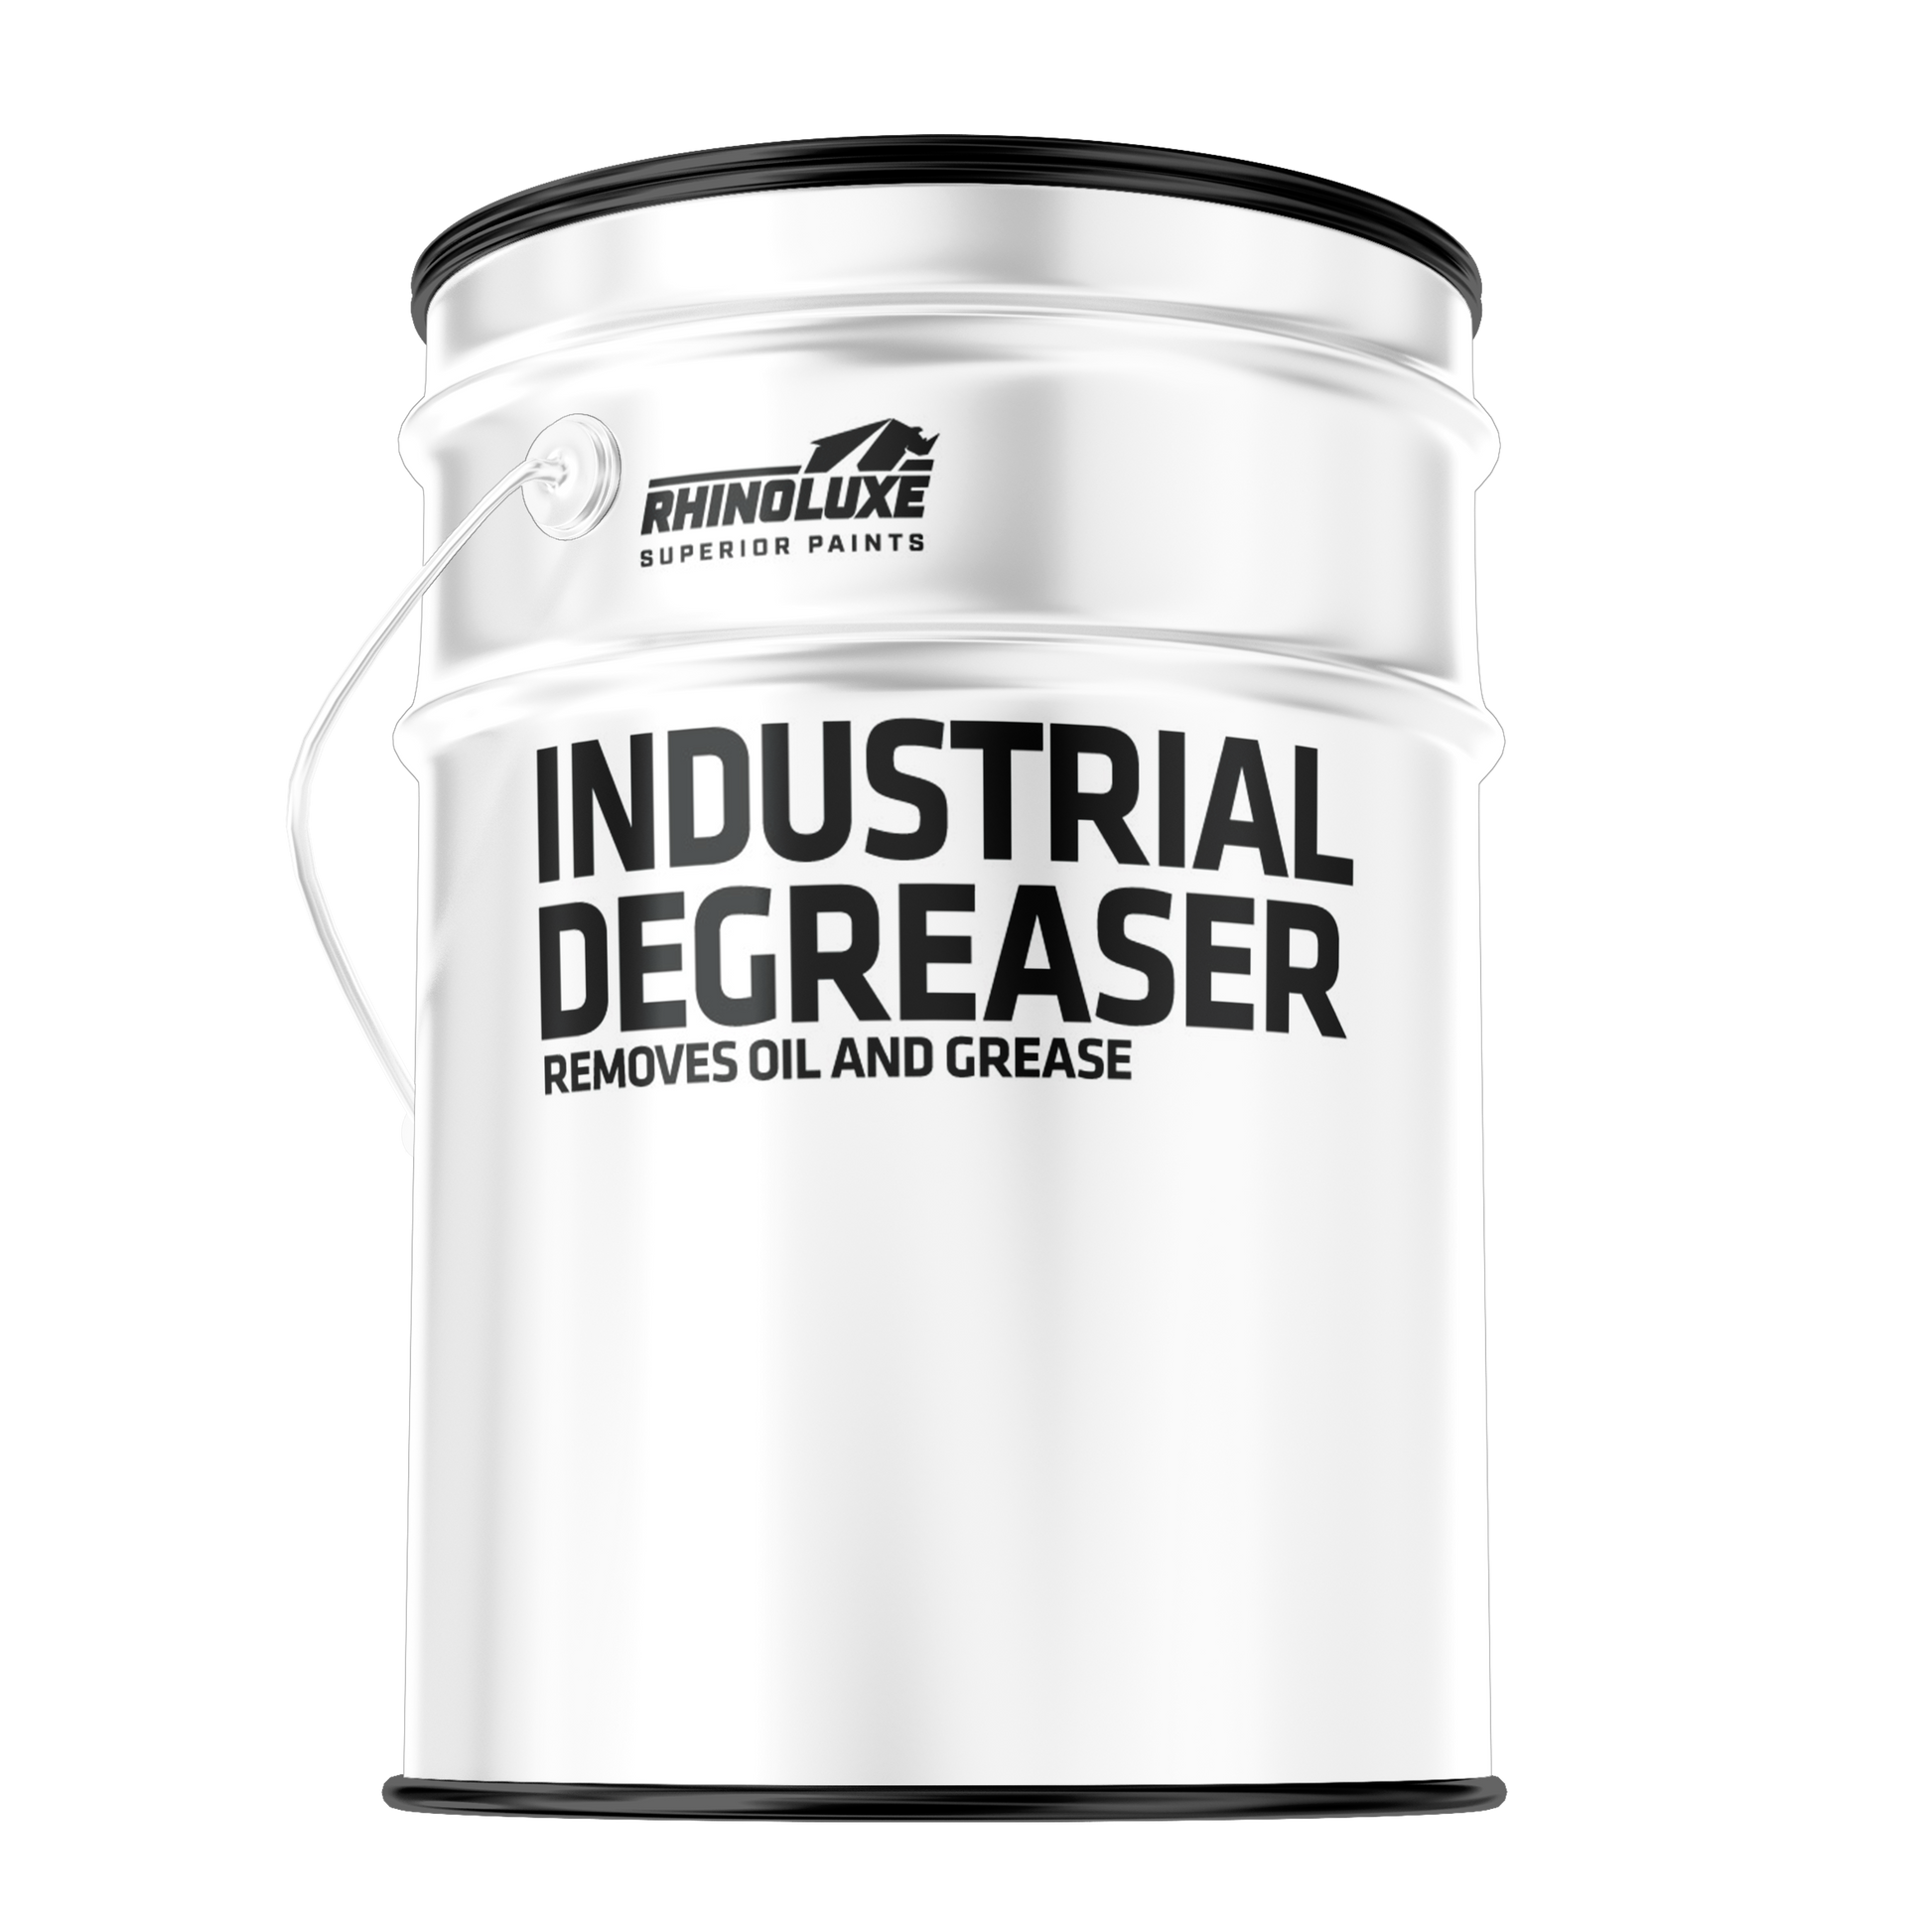 Industrial Degrease Removes Oil and Grease